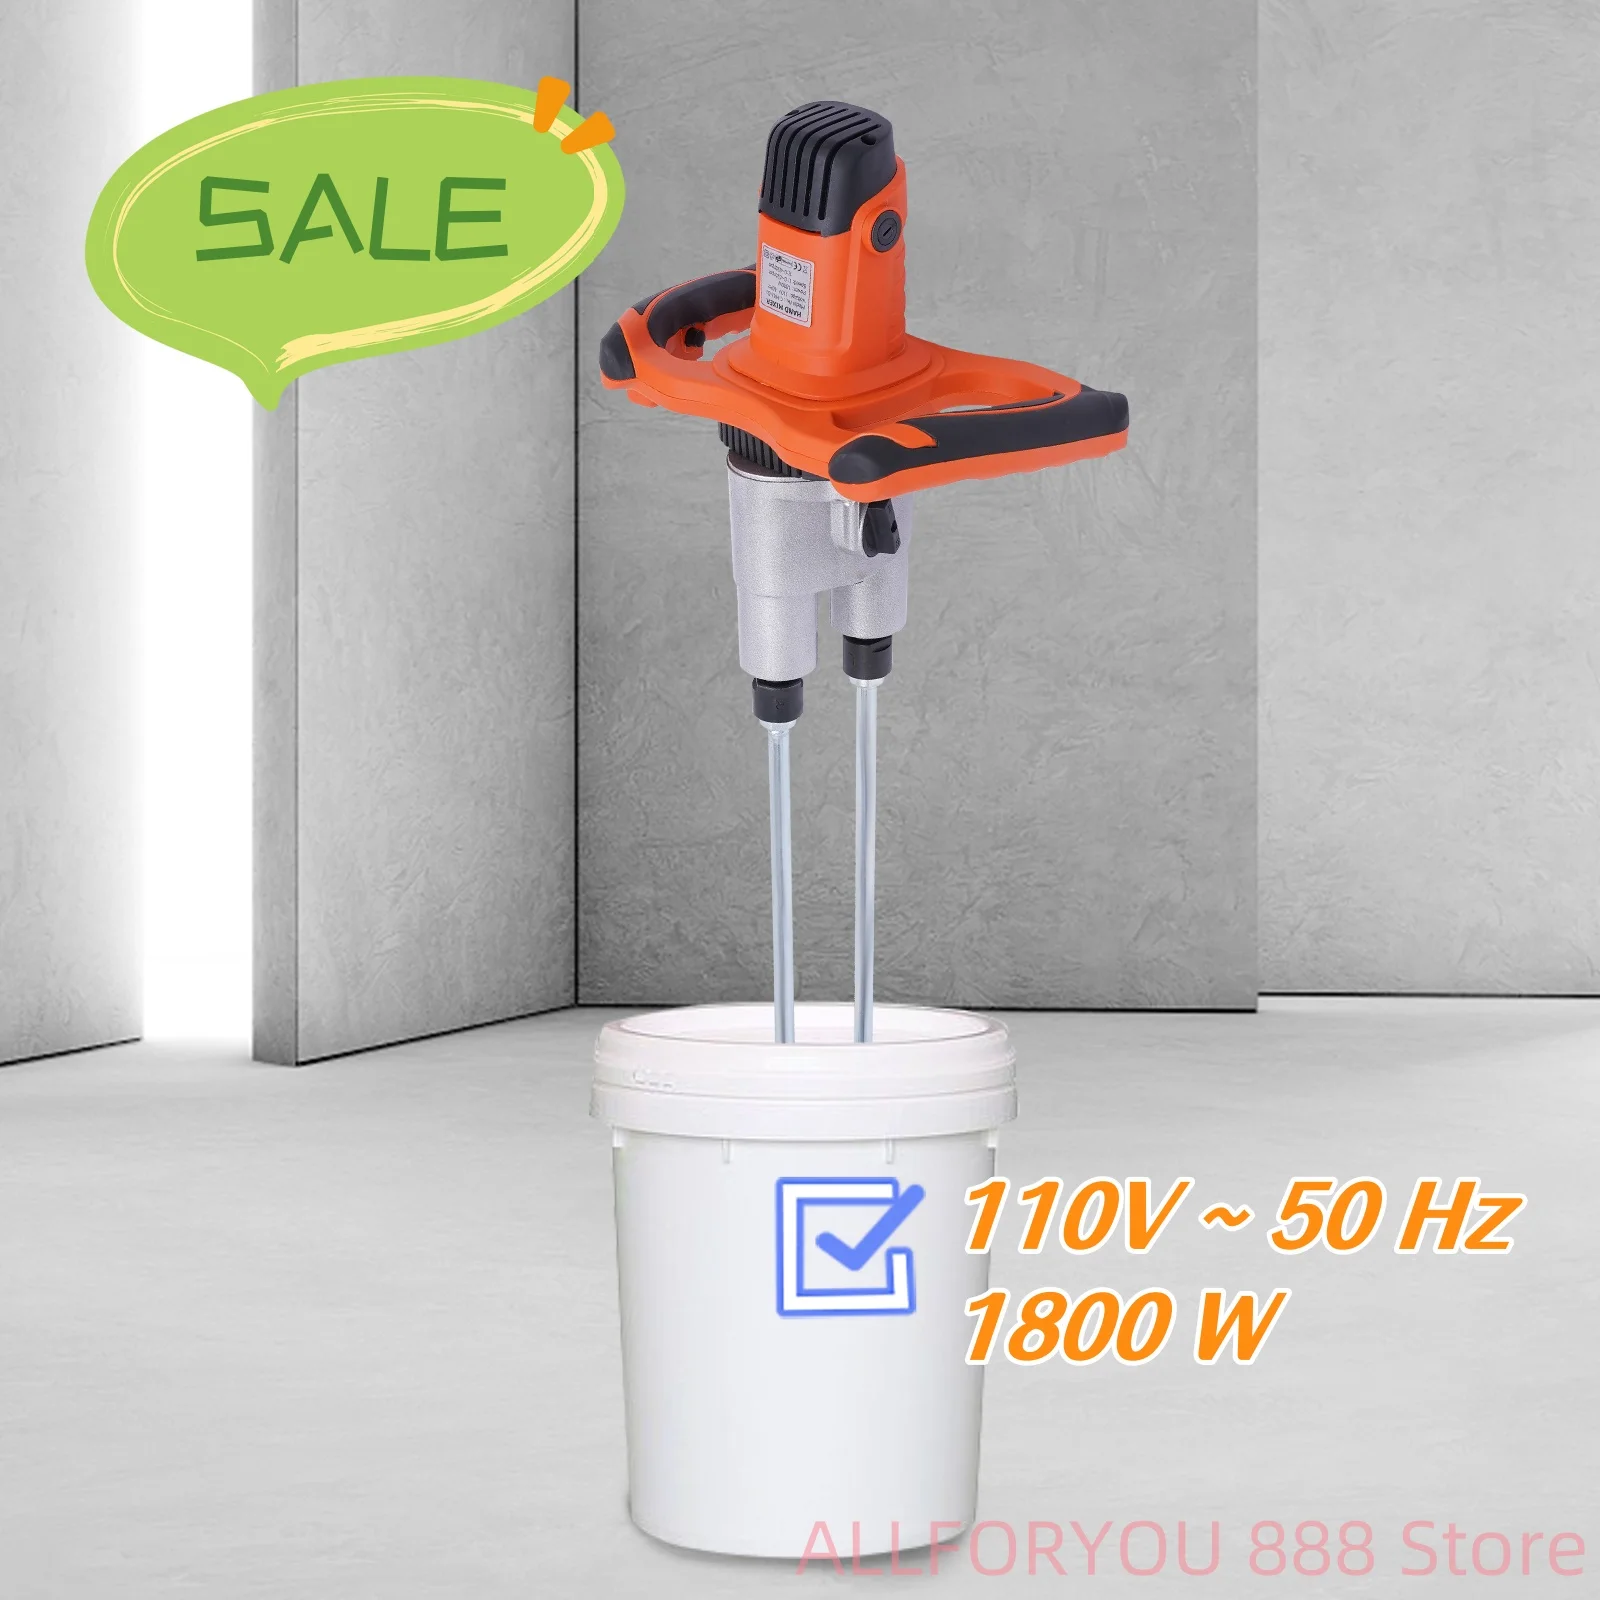 1800W Double Paddle Electric Mortar Mixer 2 Speed with Robust Aluminum Die-cast Housing Powerful and Handy bamboo lifting intelligent light and handy projector hanger with 1 2m running distance